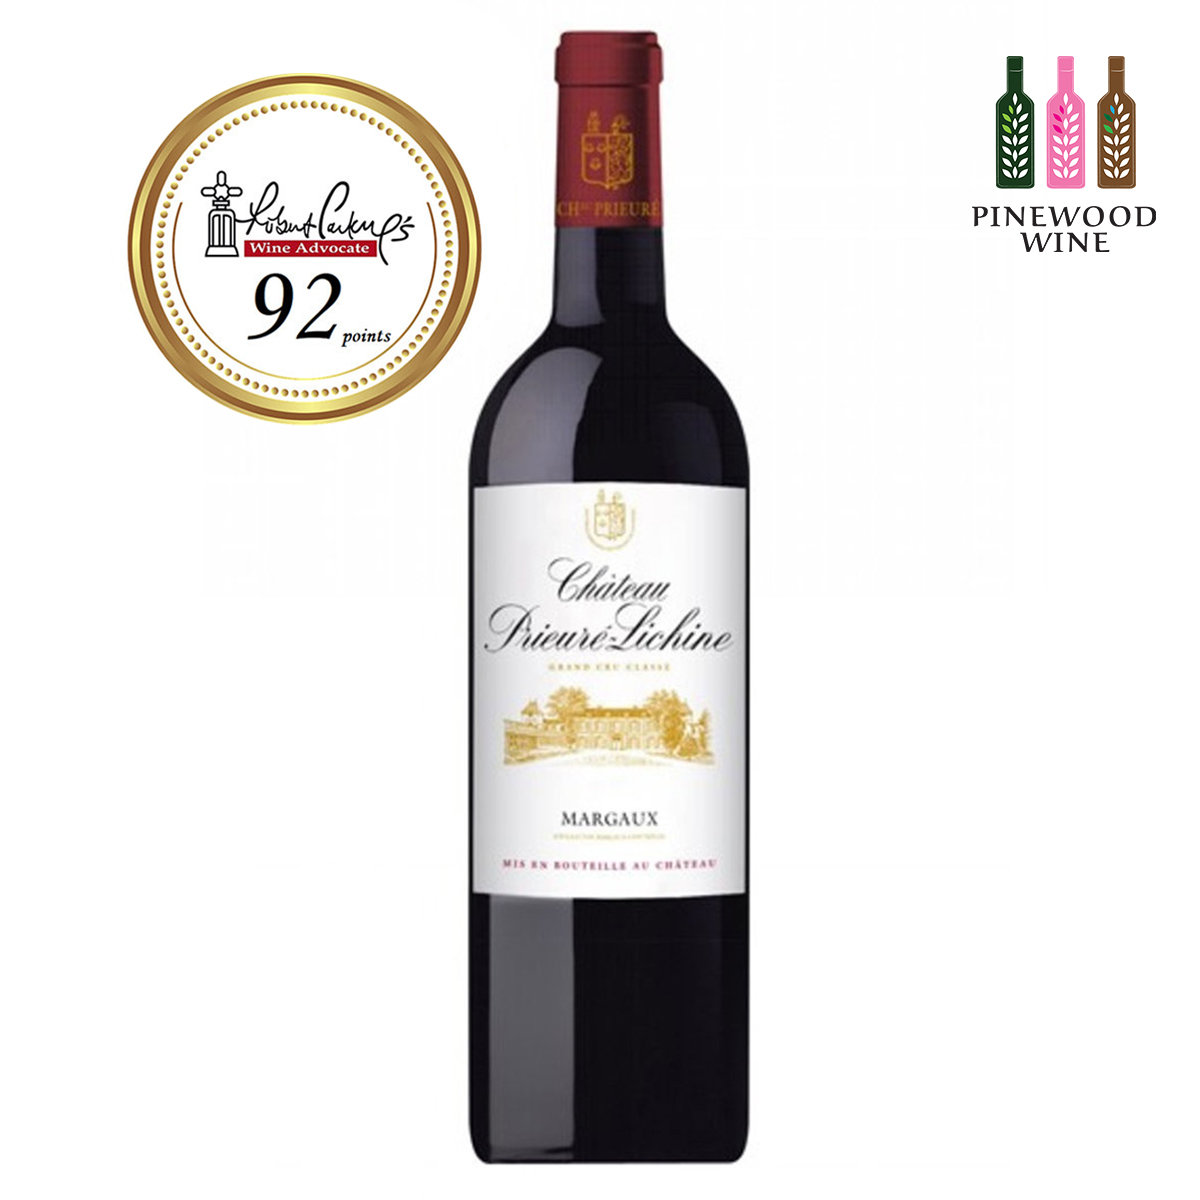 Margaux 2005, RP 92